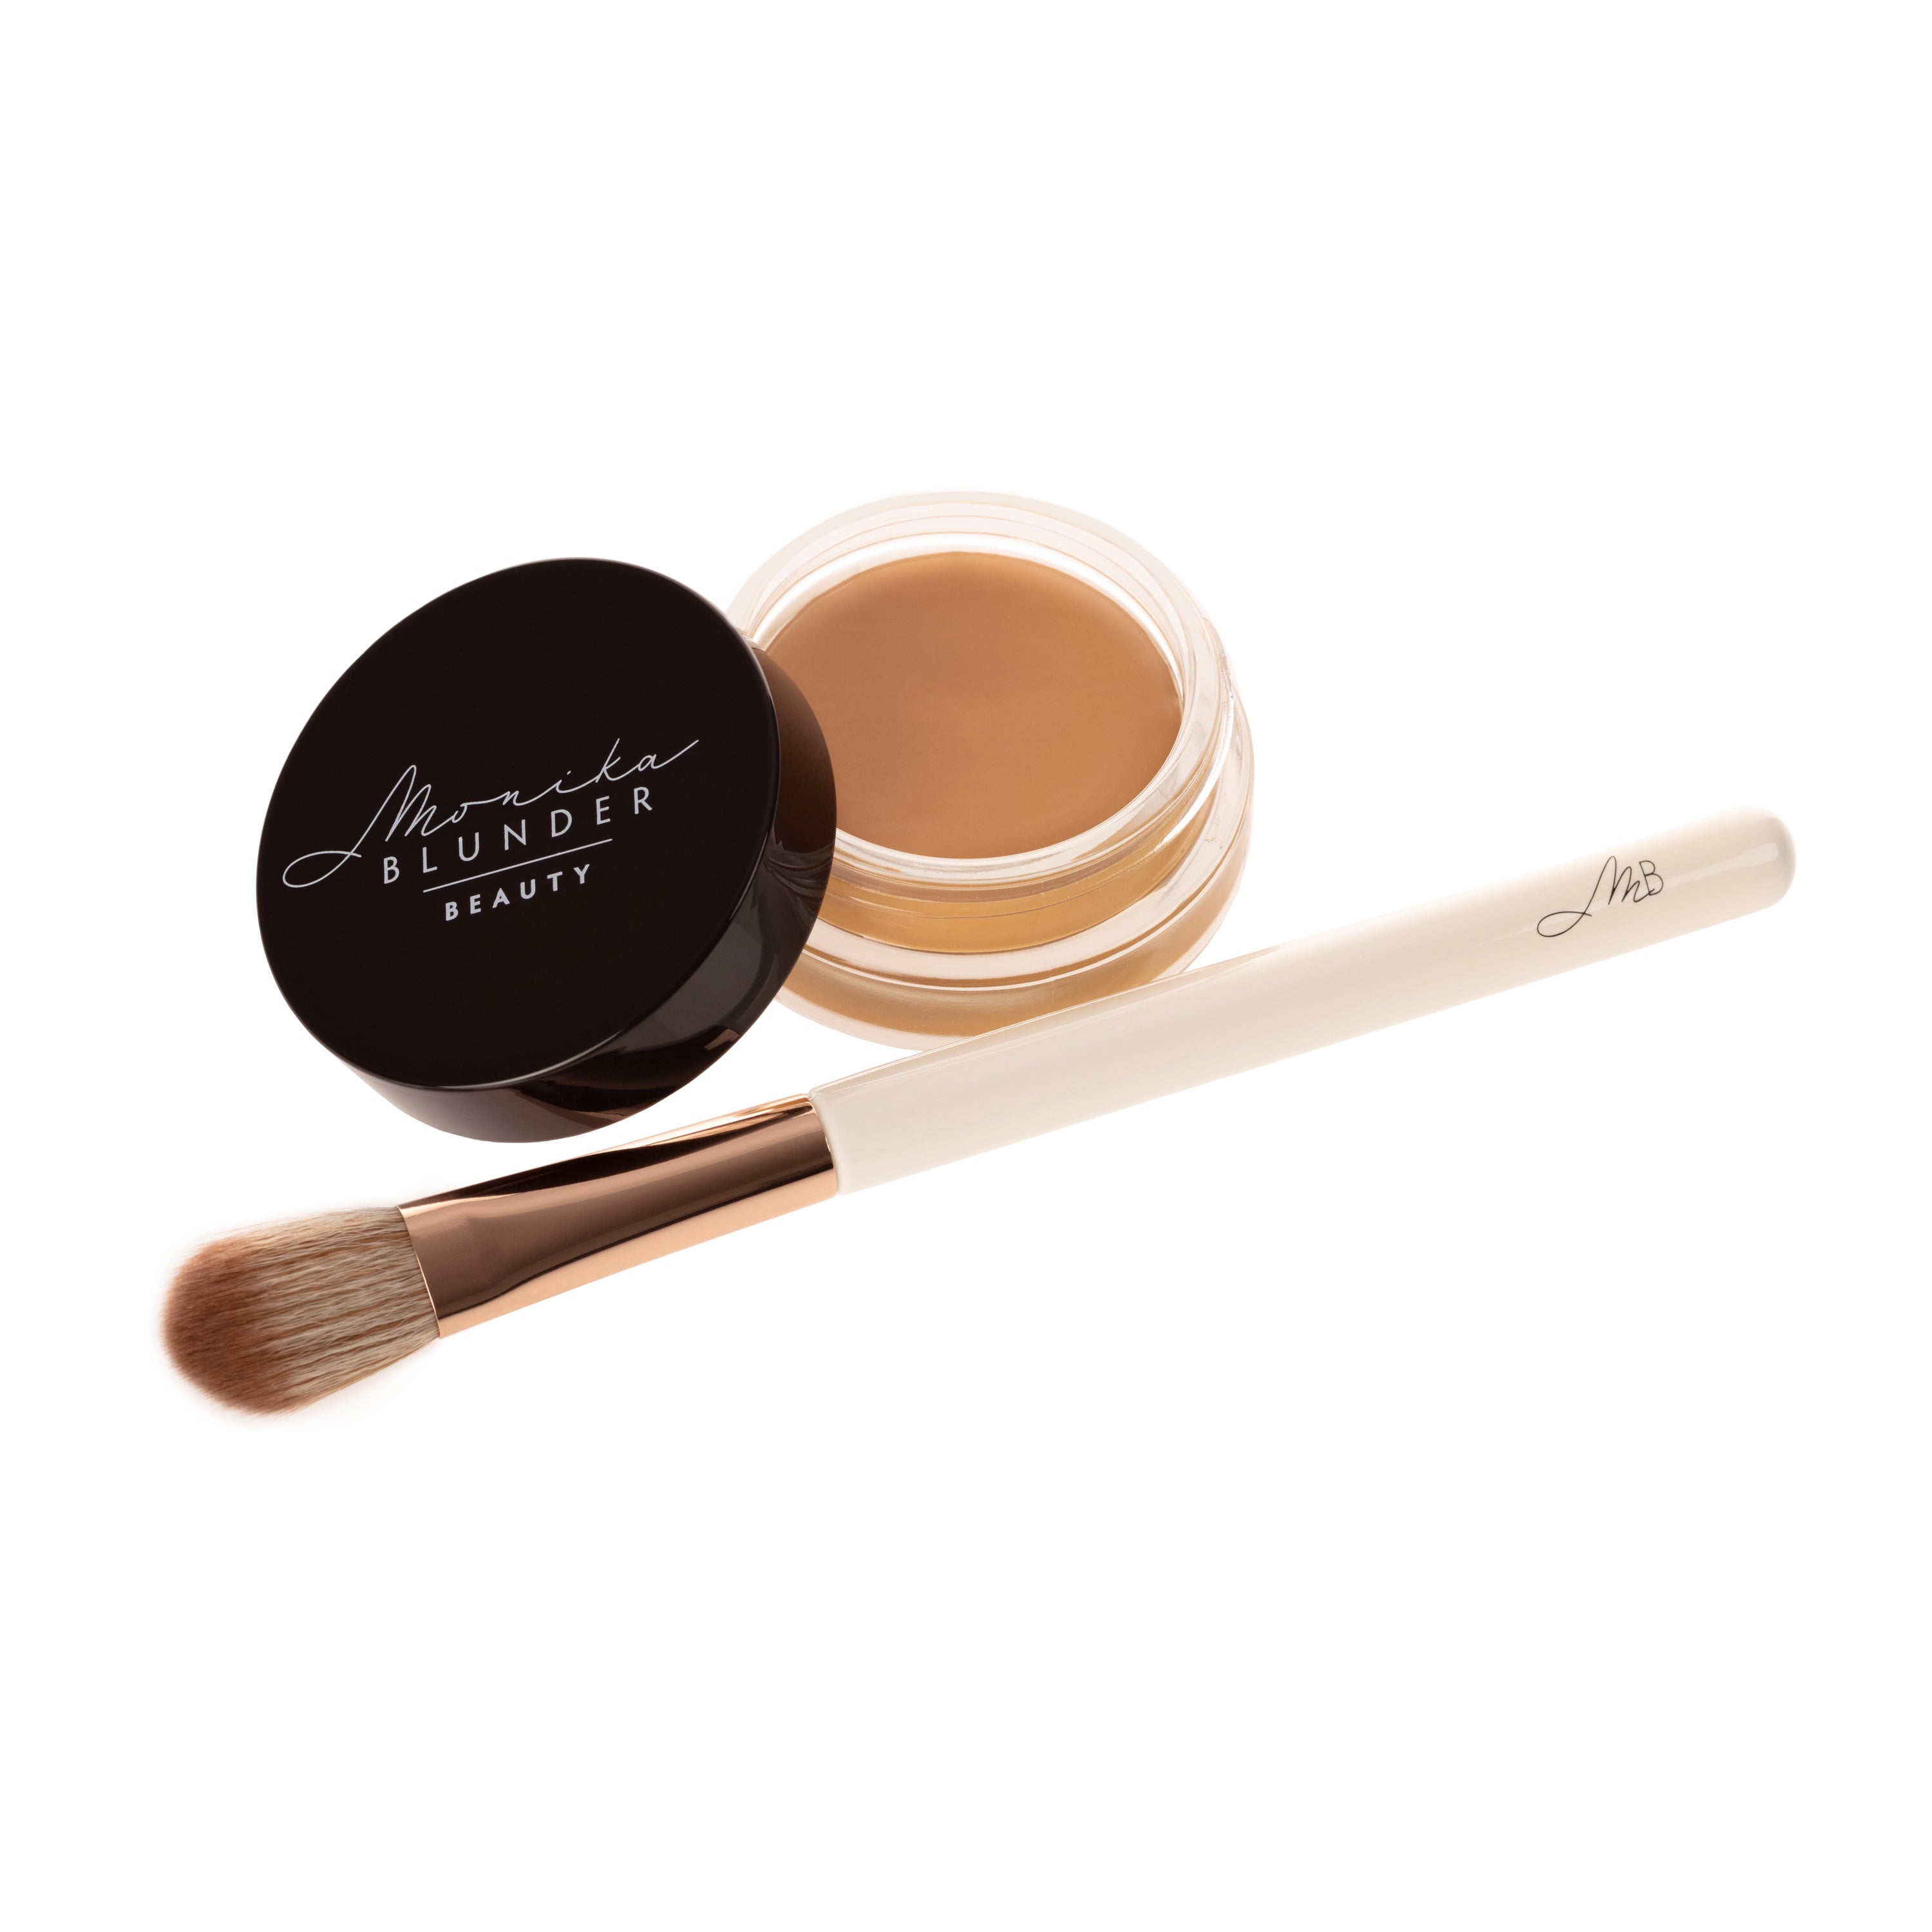 Blunder Cover an All-In-One Foundation/Concealer Shade - Vier.5 - 3